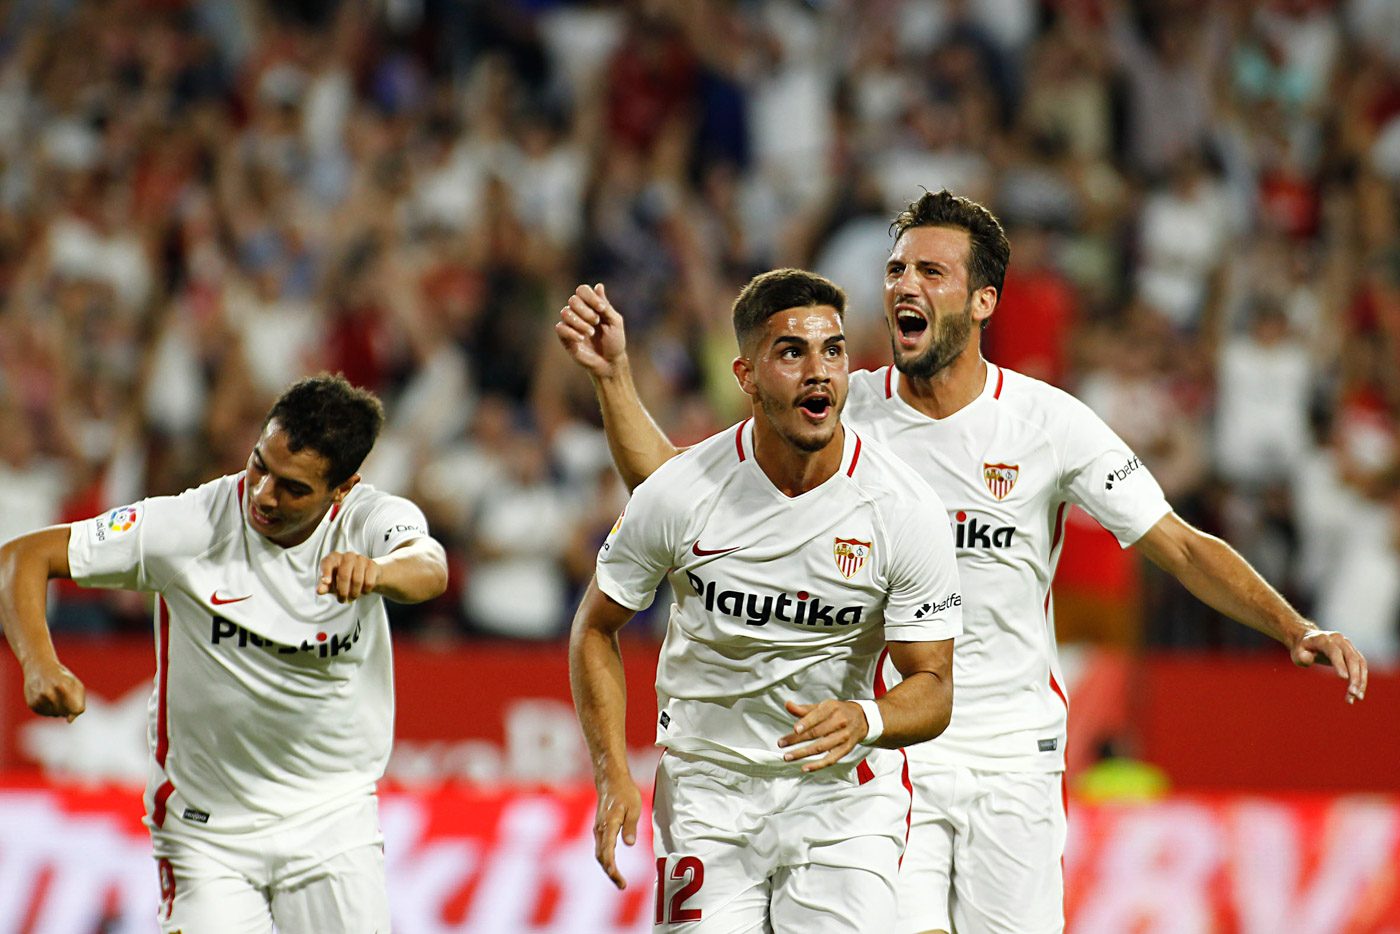 LaLiga’s most exciting title race in years returns